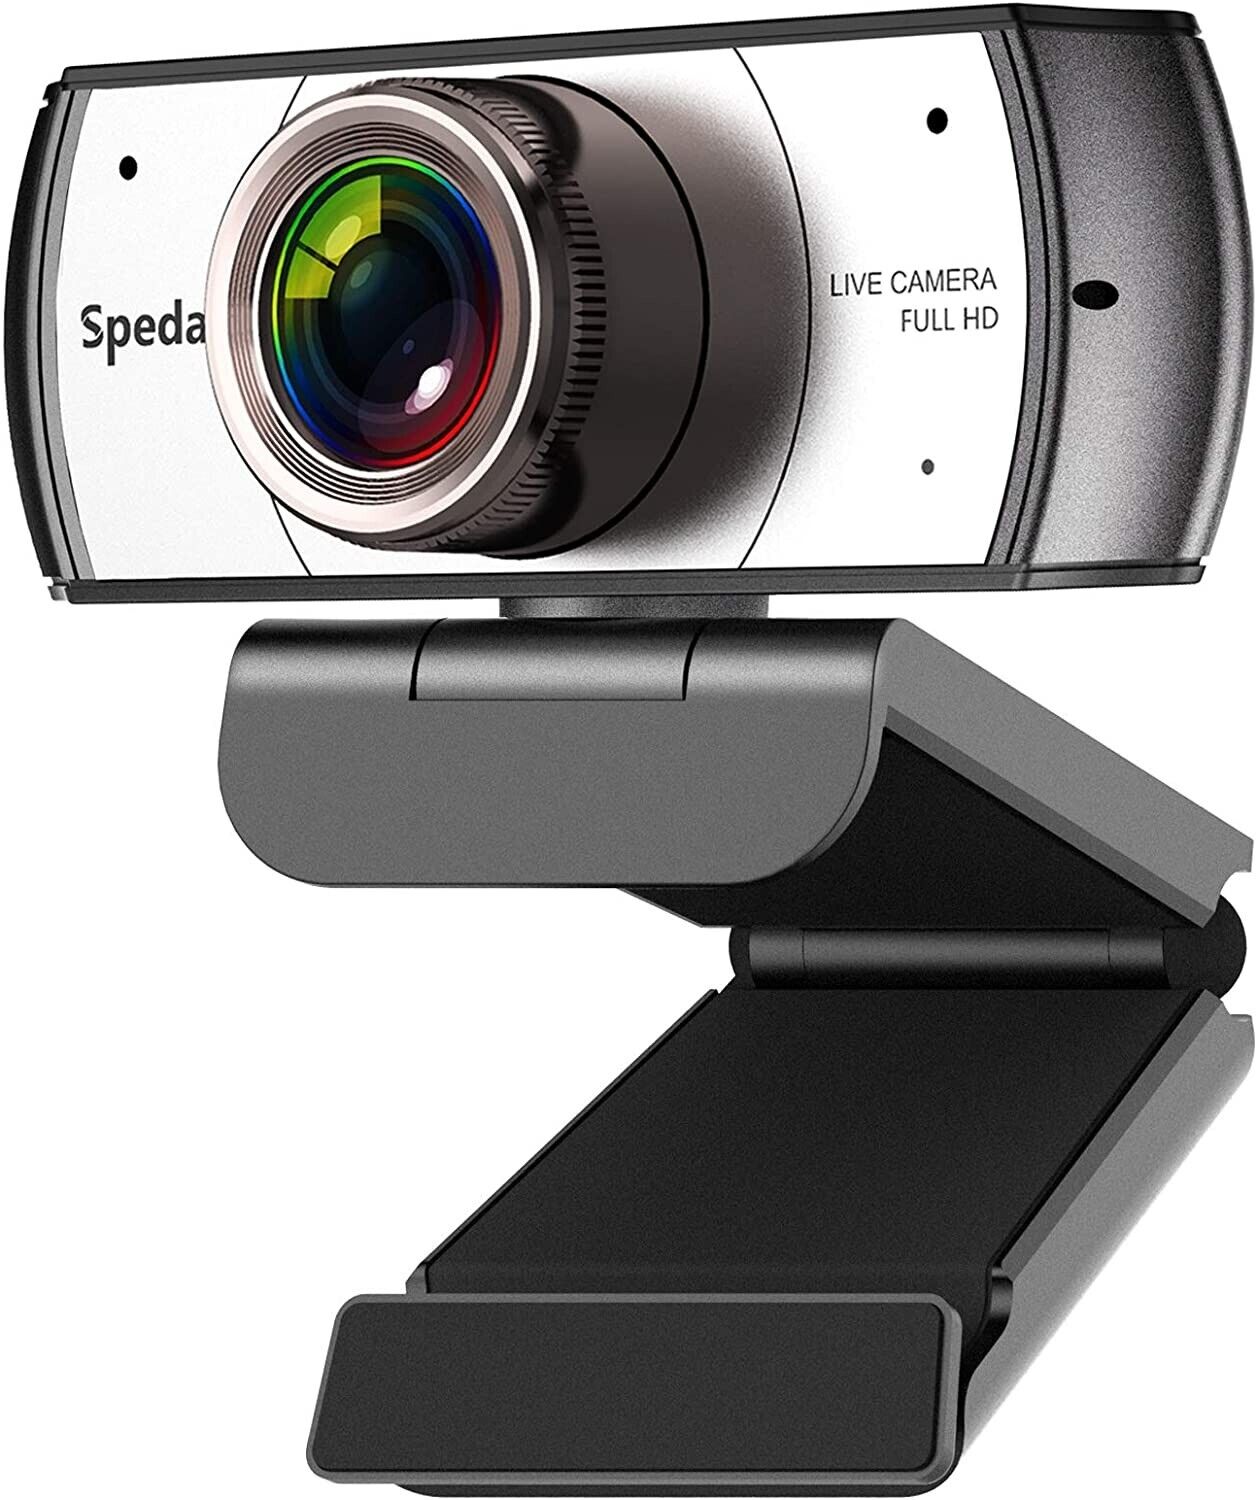 Spedal 920P-Webcam Wide Angle 120° With Microphone Streaming PC For Conference